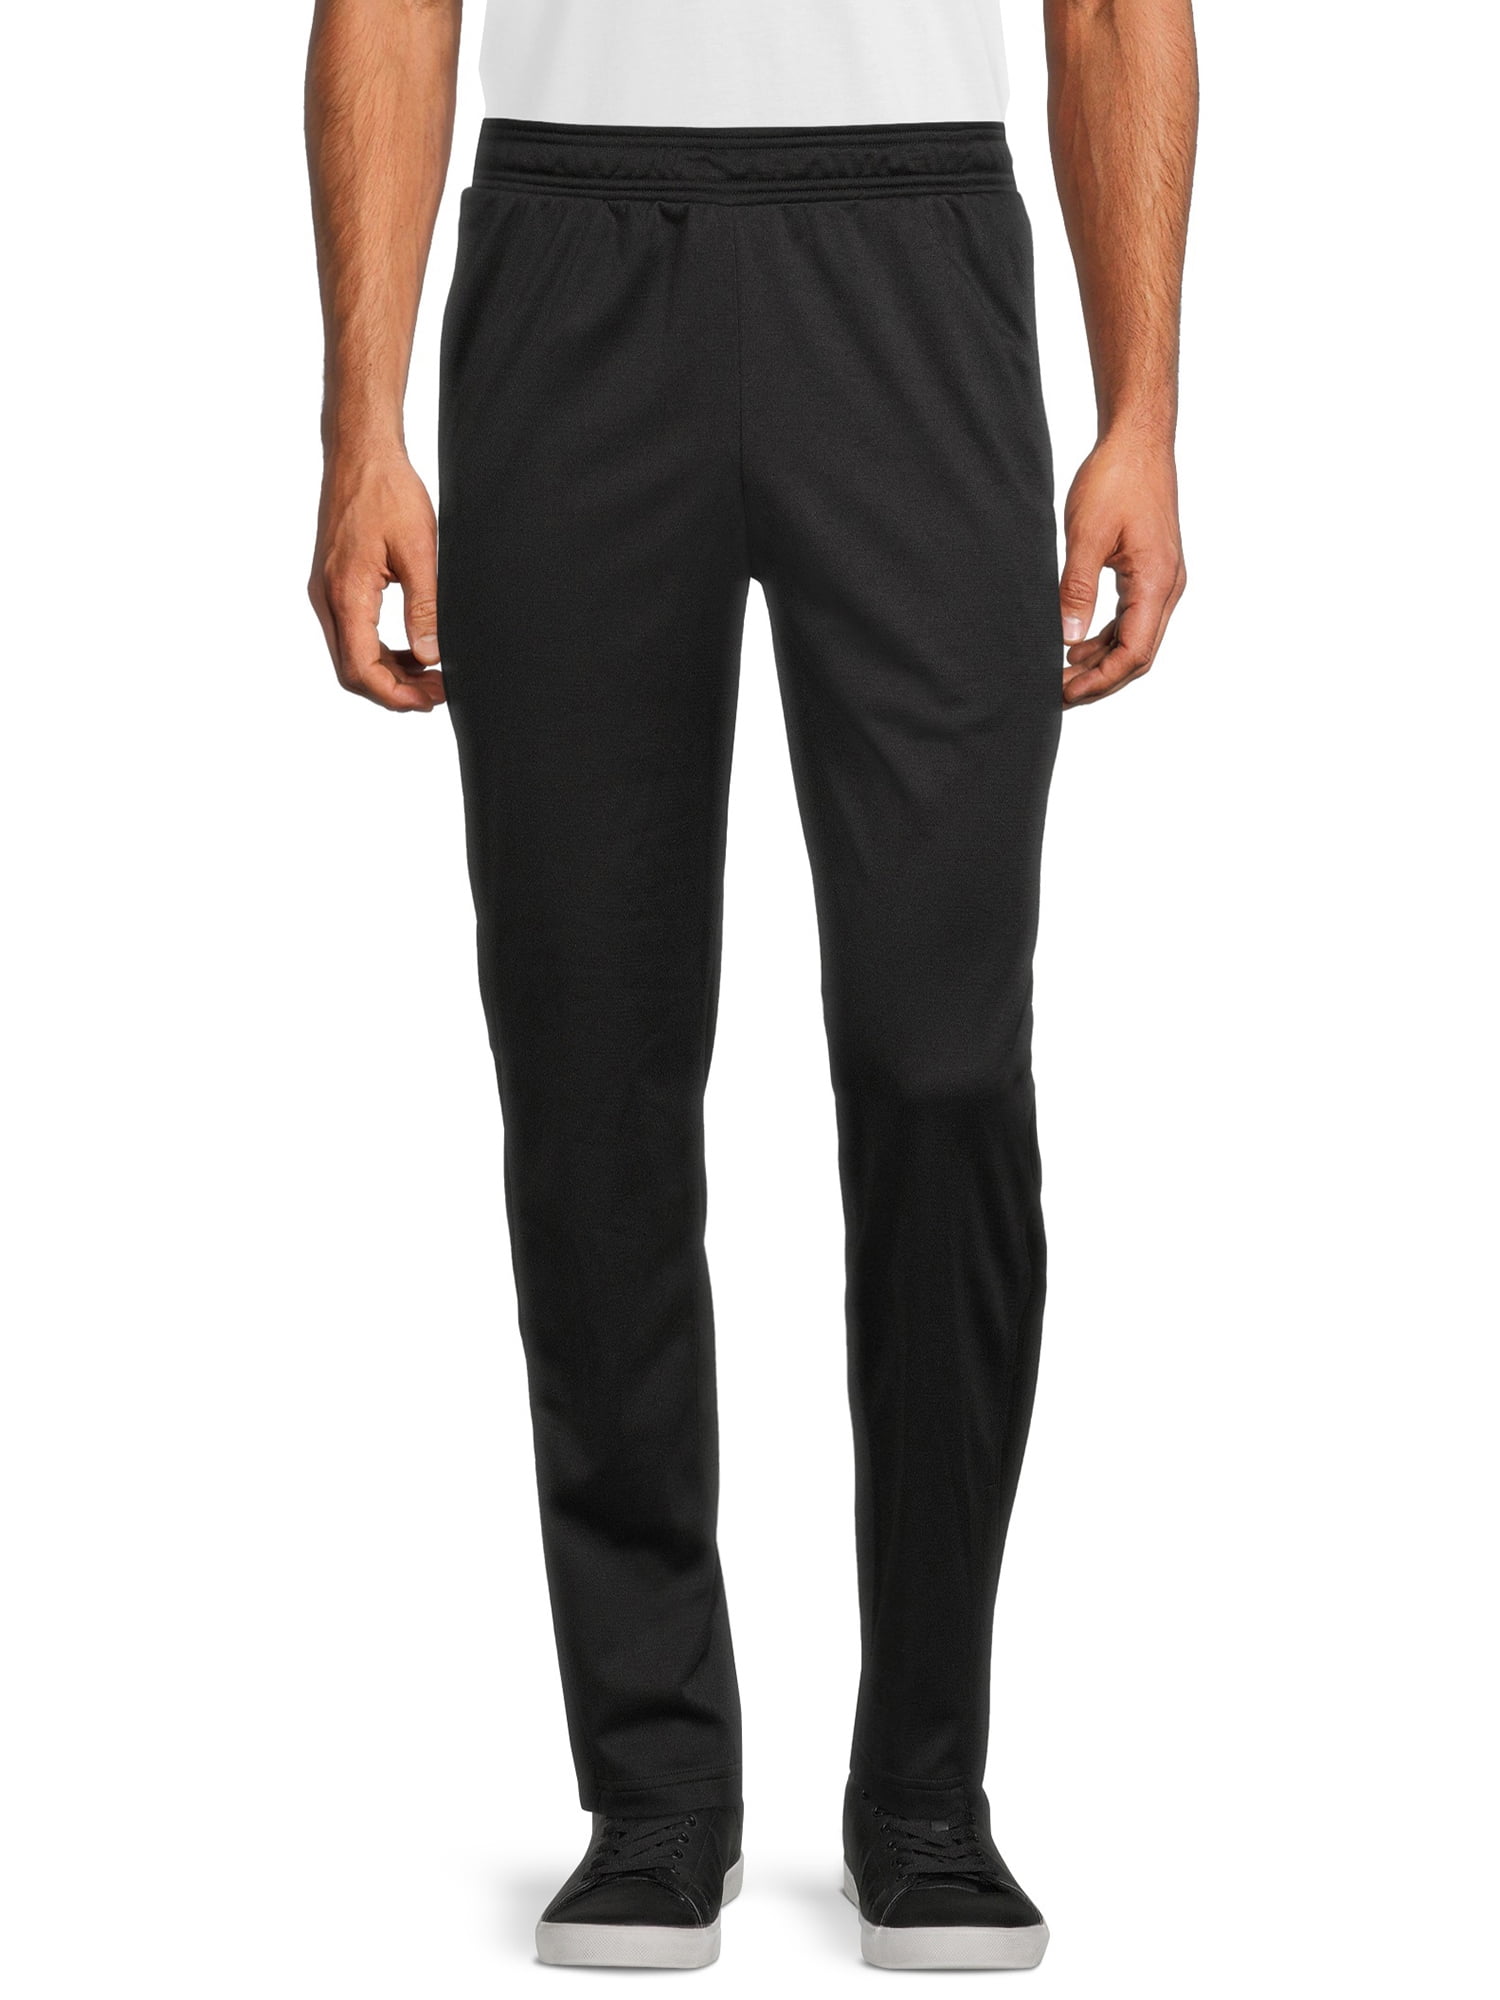 PERFORMAX Active Track Pants With Insert Pockets|BDF Shopping